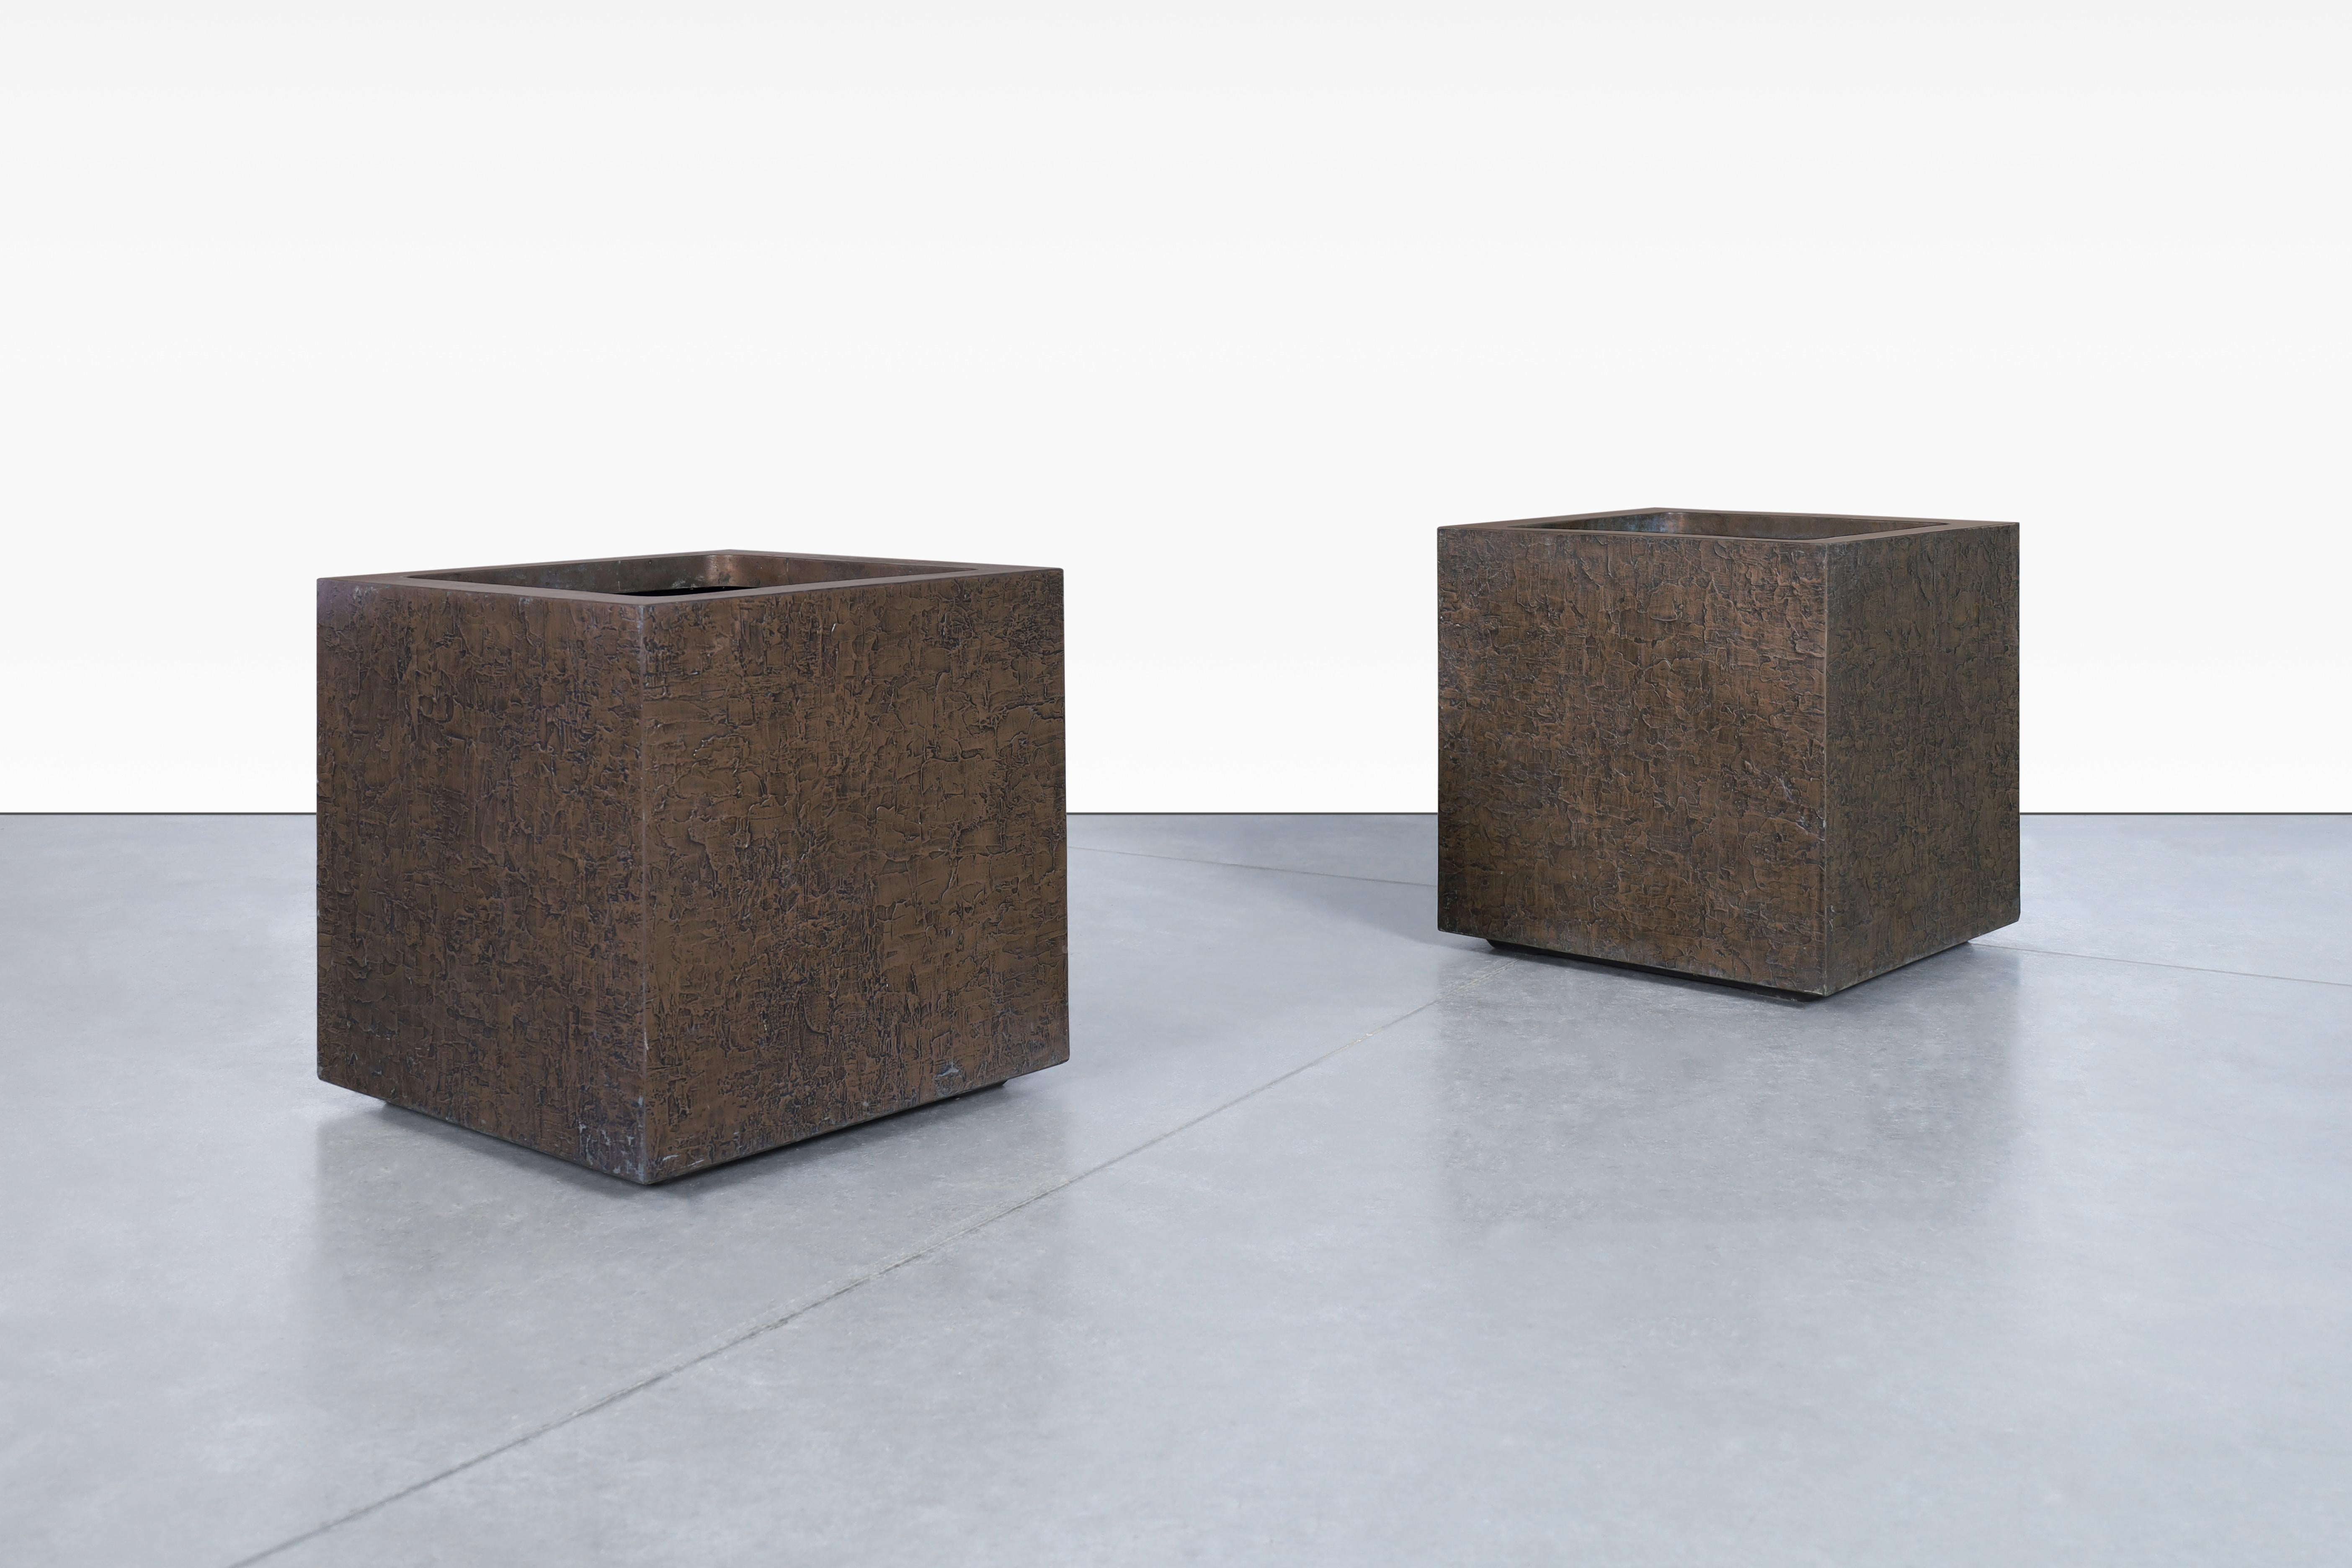 Beautiful mid-century modern bronze resin square planters manufactured in the United States, circa 1970s. These planters are manufactured by the well-known company Forms and Surfaces, and showcase a harmonious fusion of bronze resin, fiberglass, and